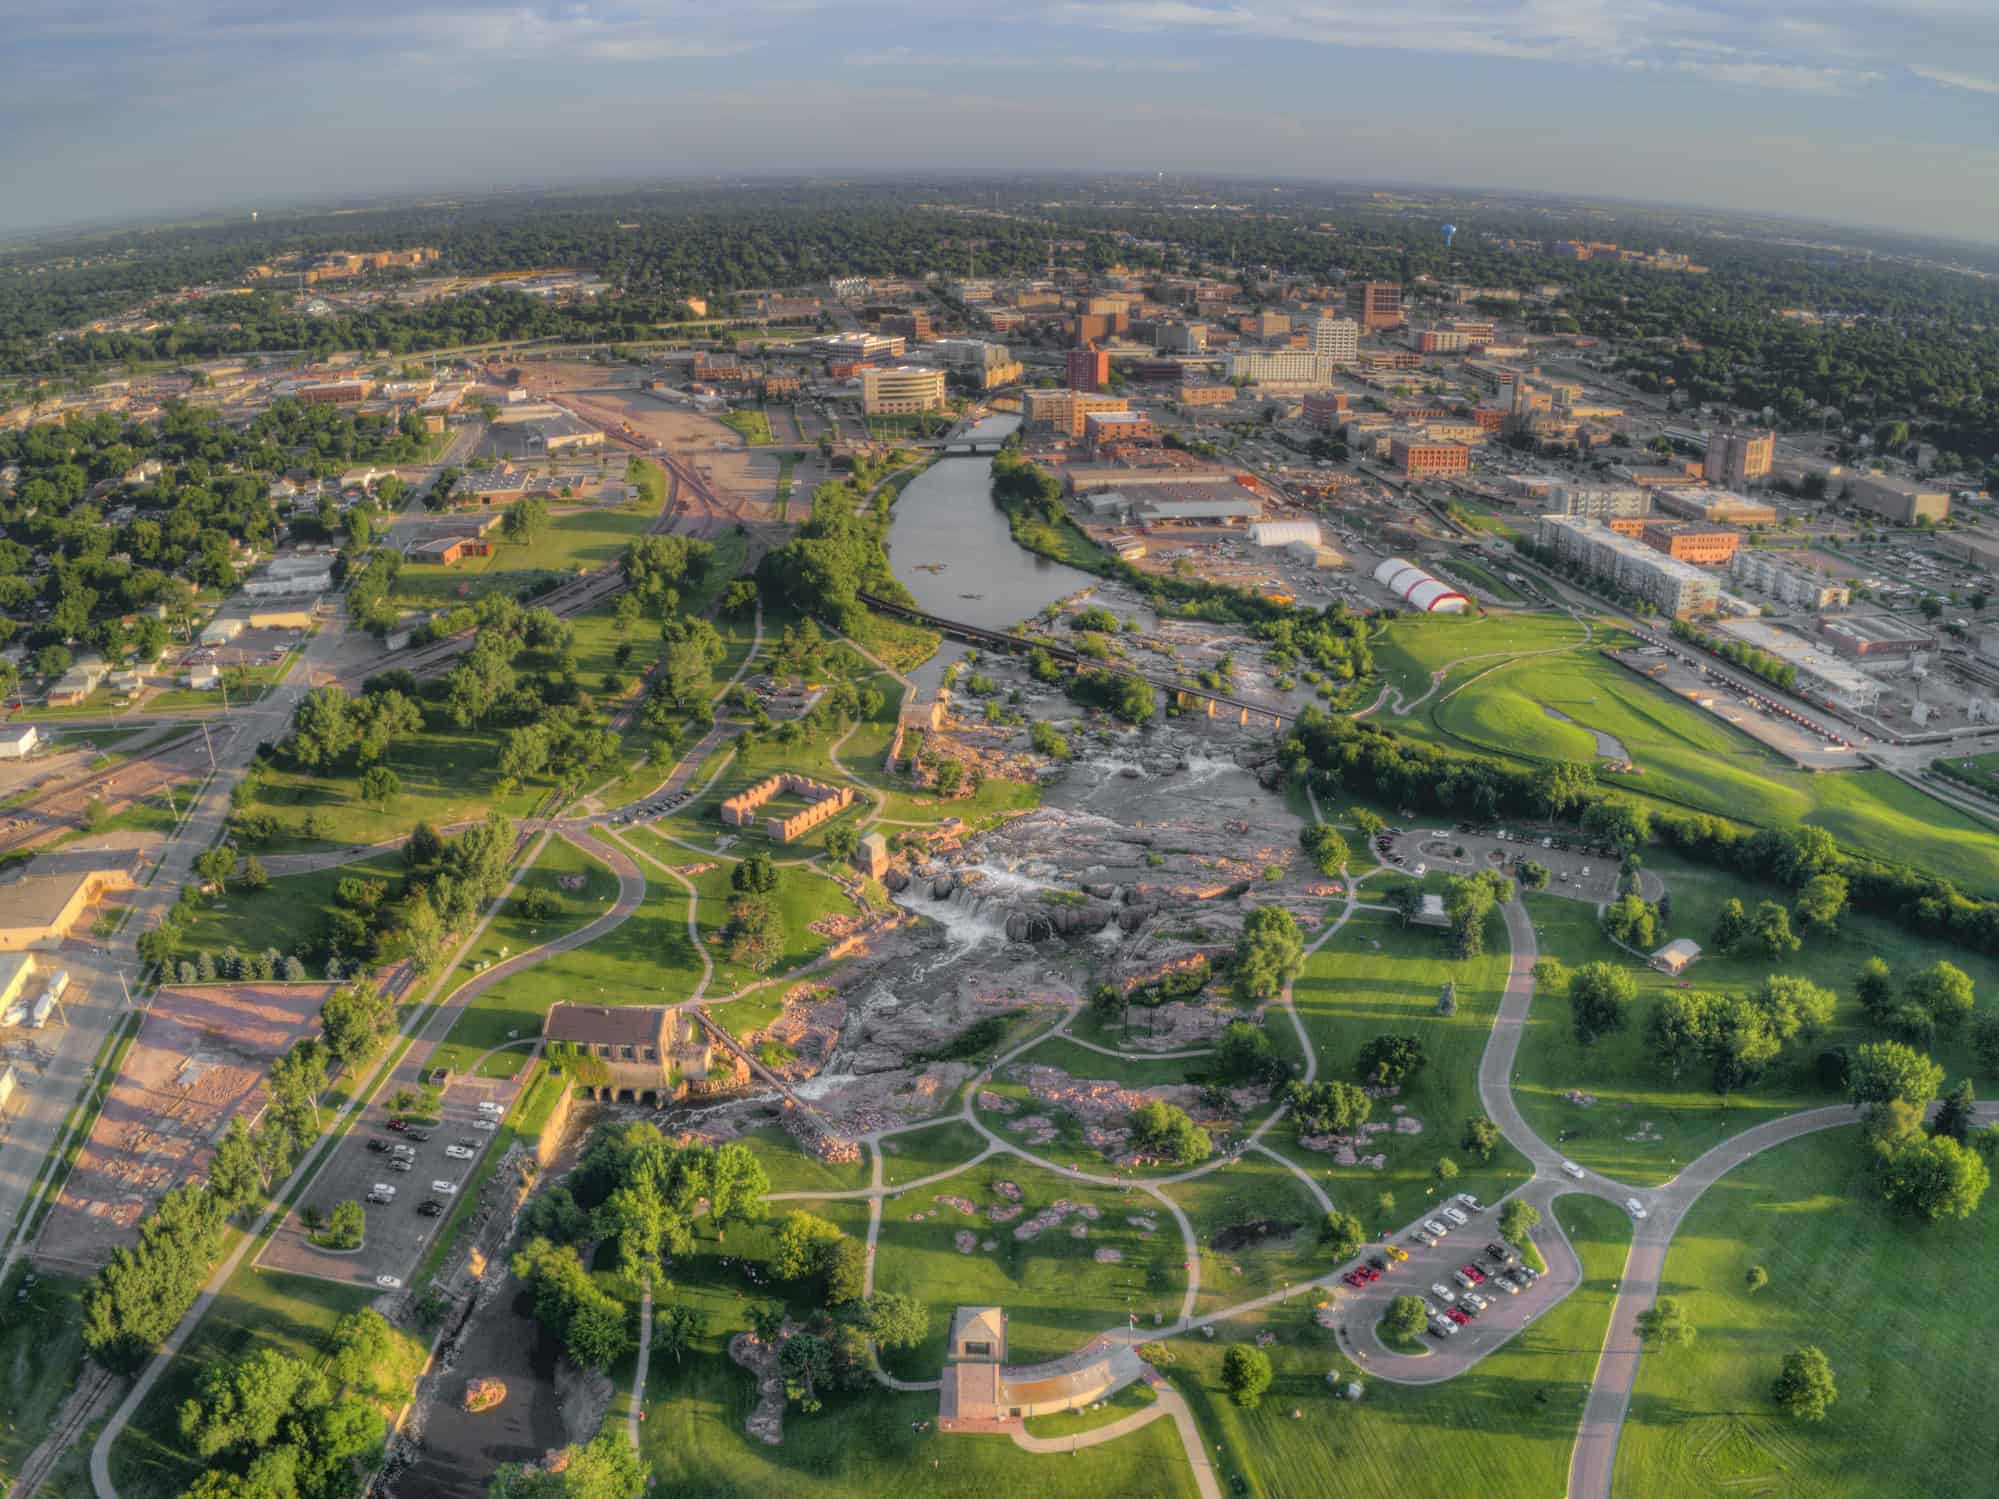 Summer Aerial View of Sioux Falls, The largest City in the State of South Dakota